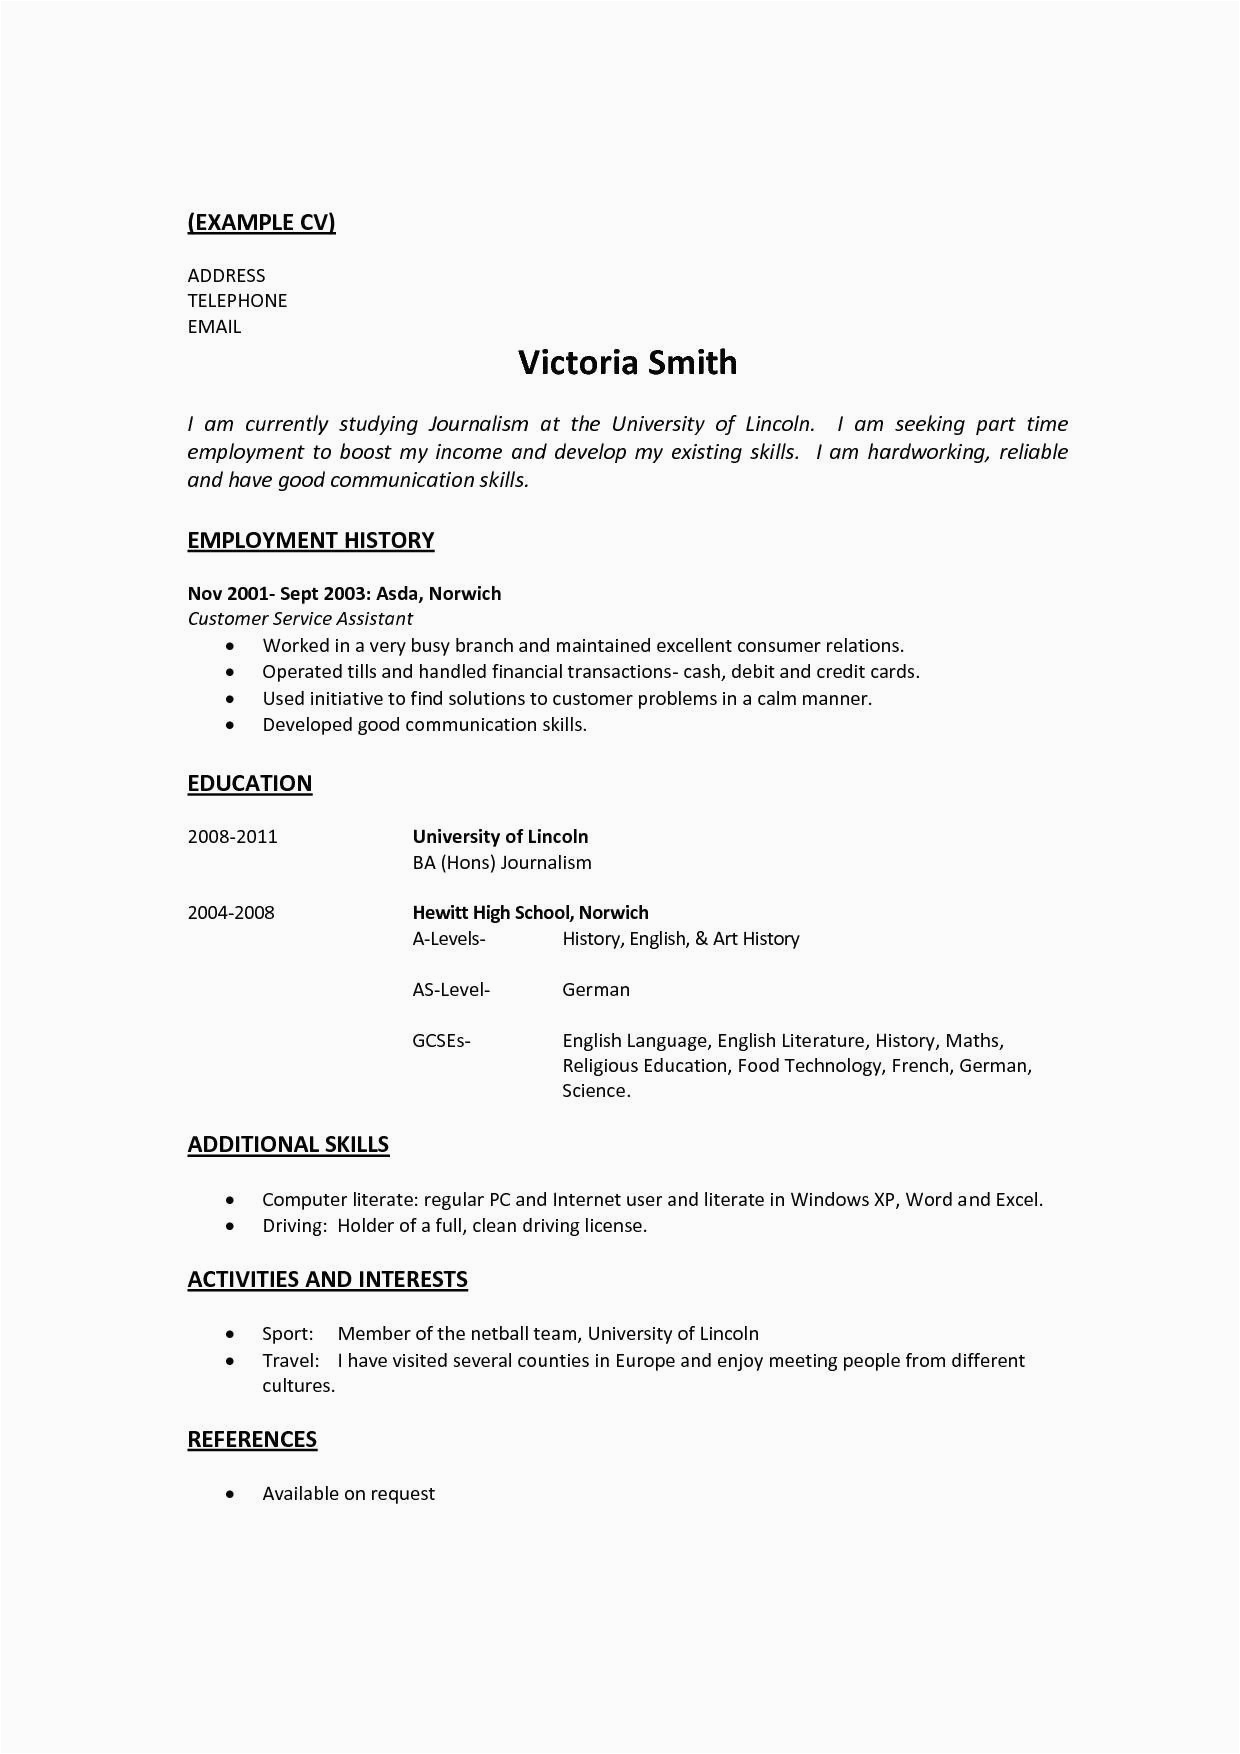 Resume Sample for someone with No Work Experience Resume Templates for Students with No Work Experience